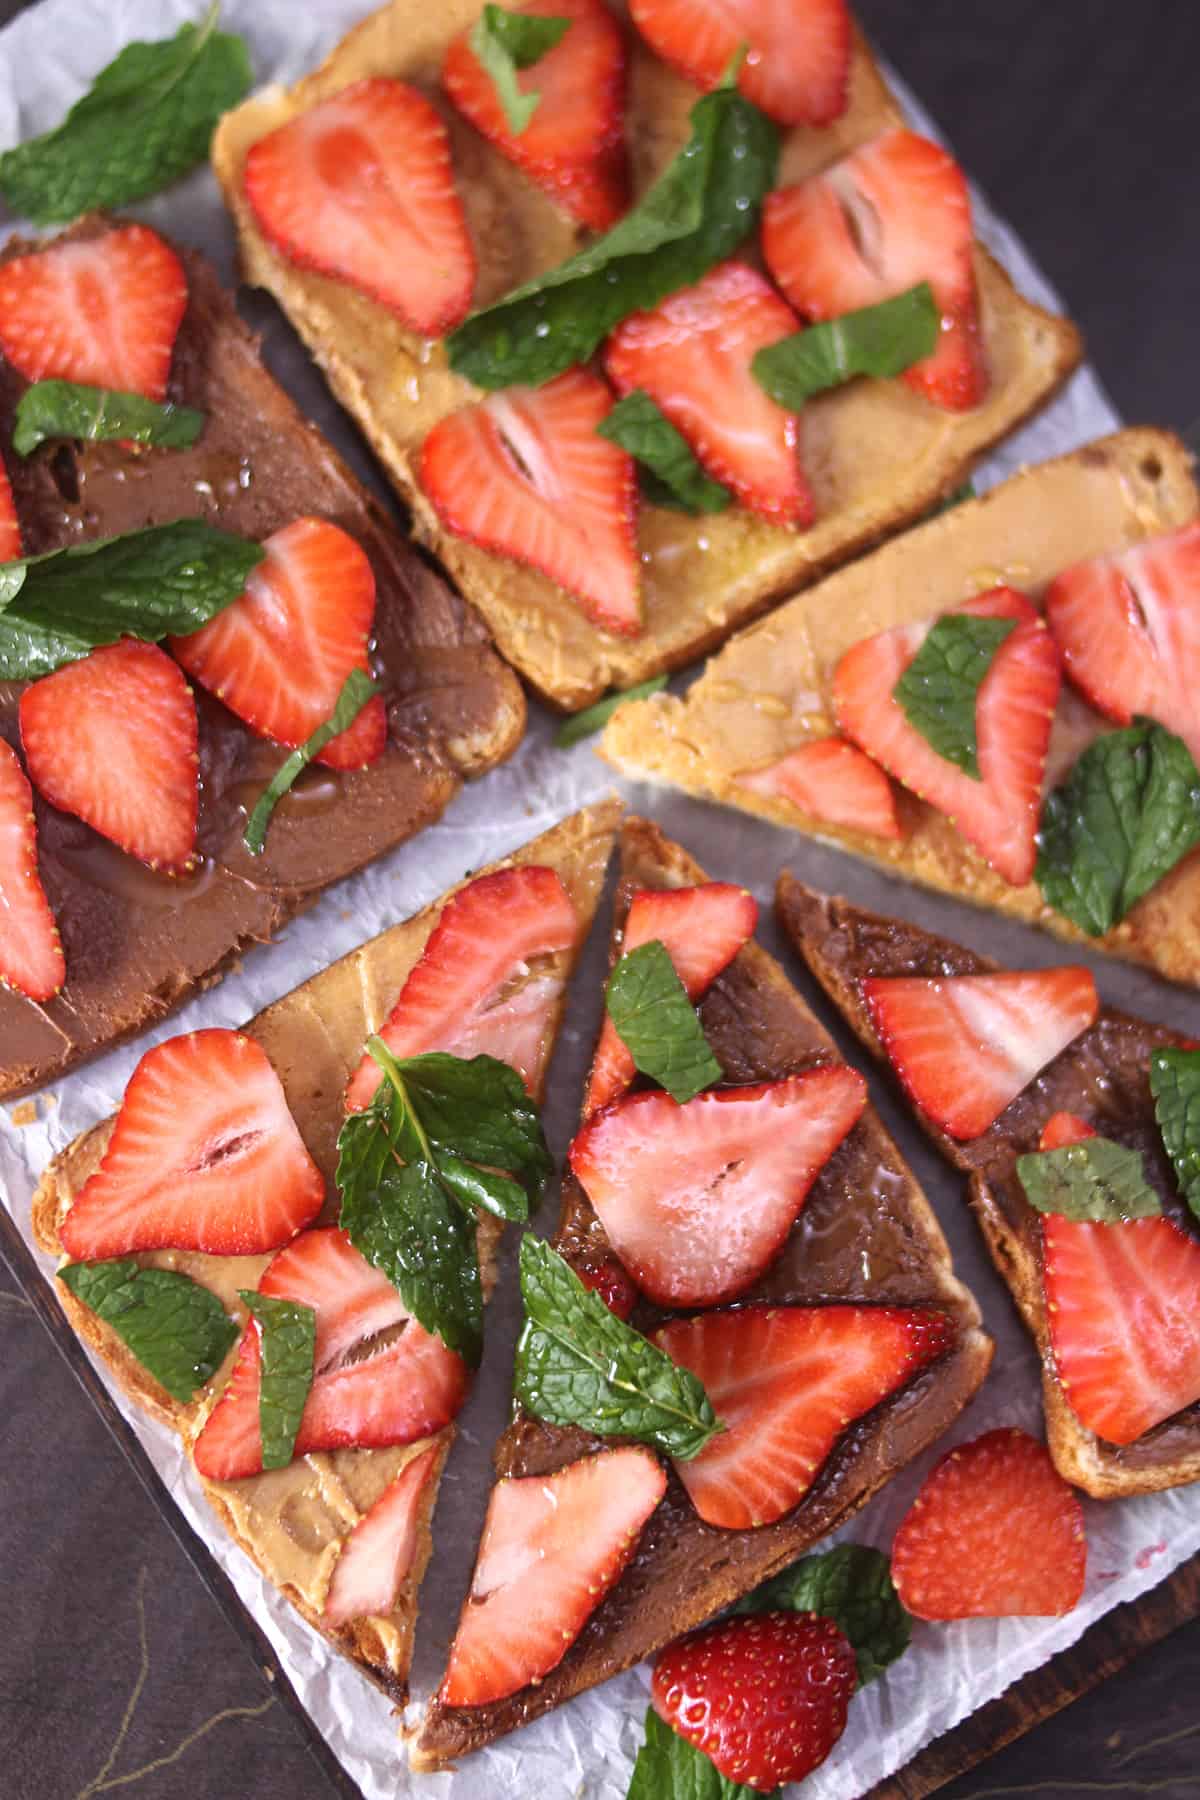 4 strawberry bread toast with peanut butter and Nutella, garnished with mint leaves.  